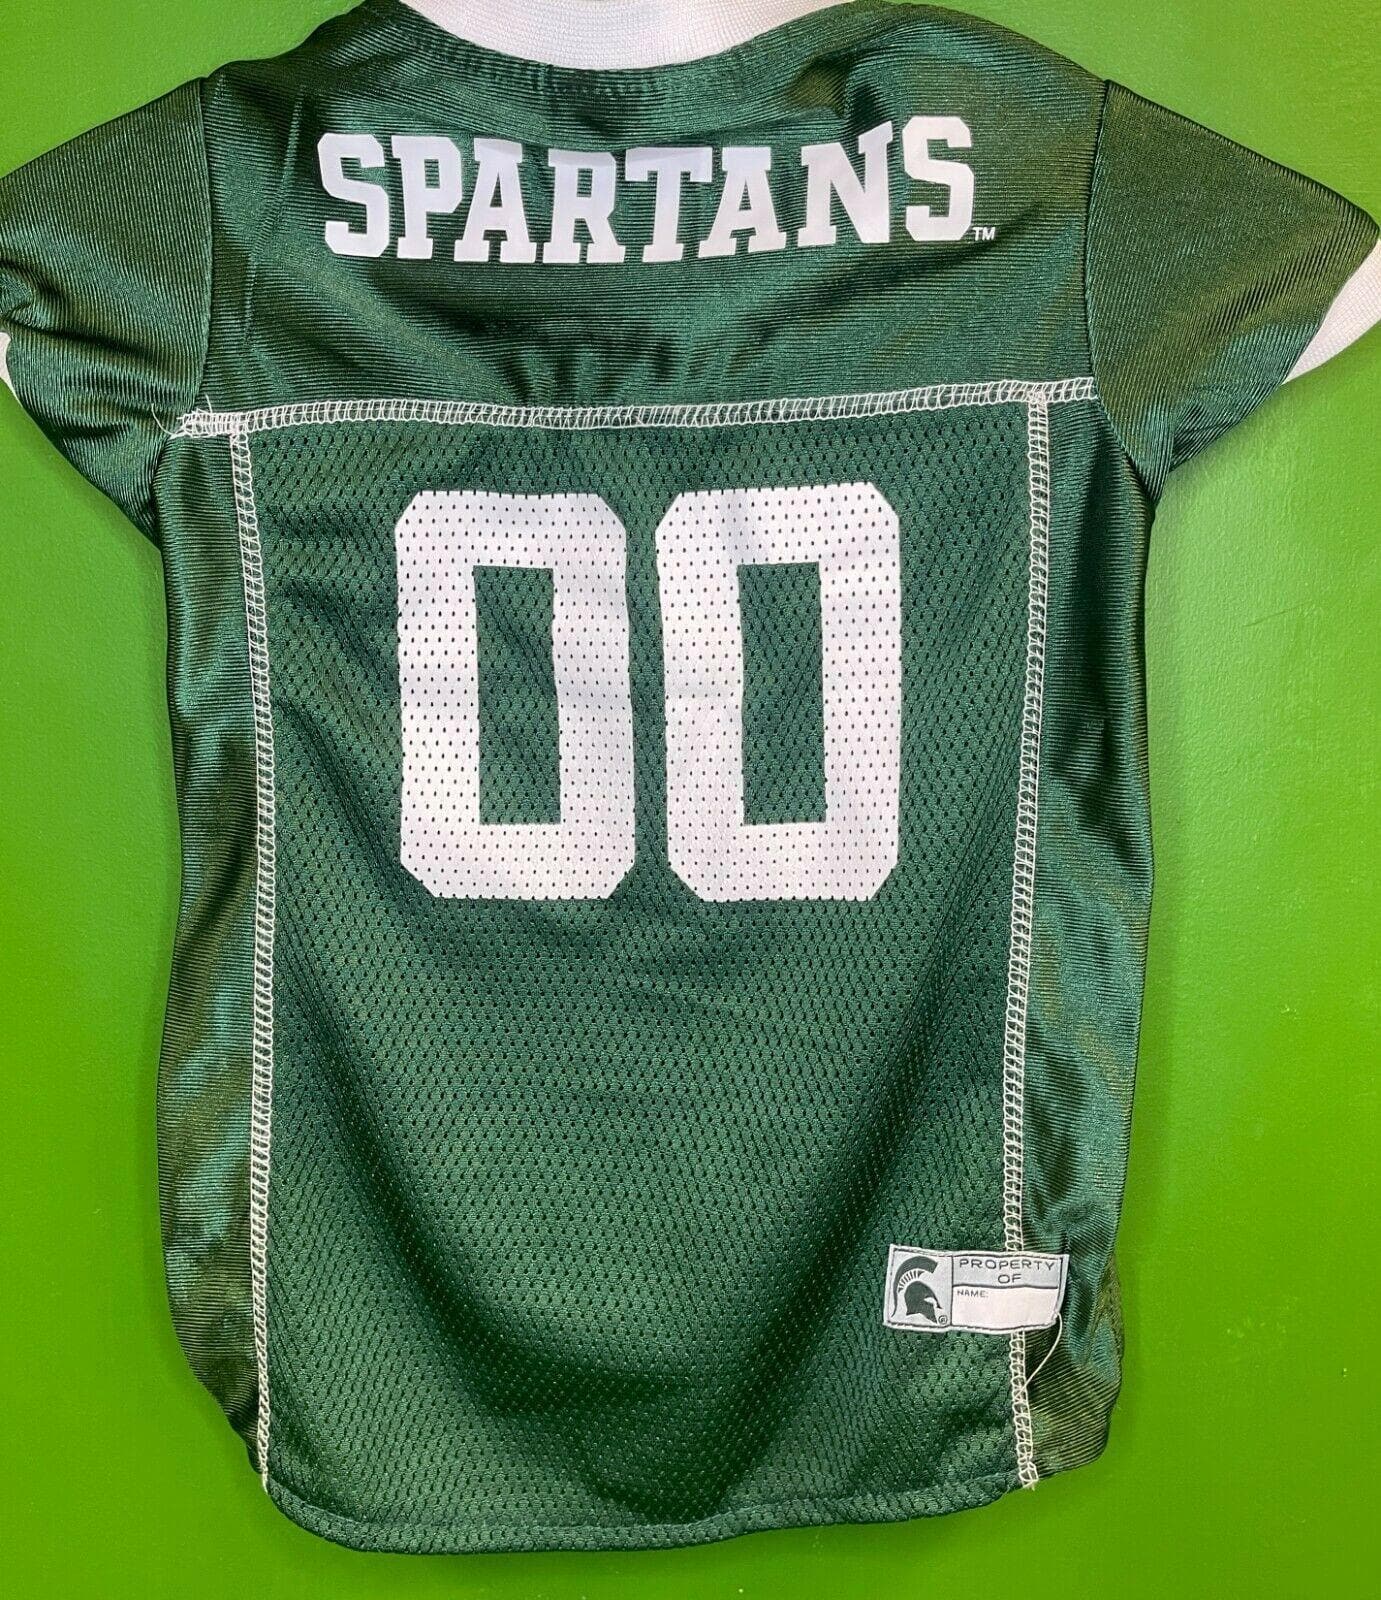 NCAA Michigan State Spartans Dog Shirt Jersey Size Large